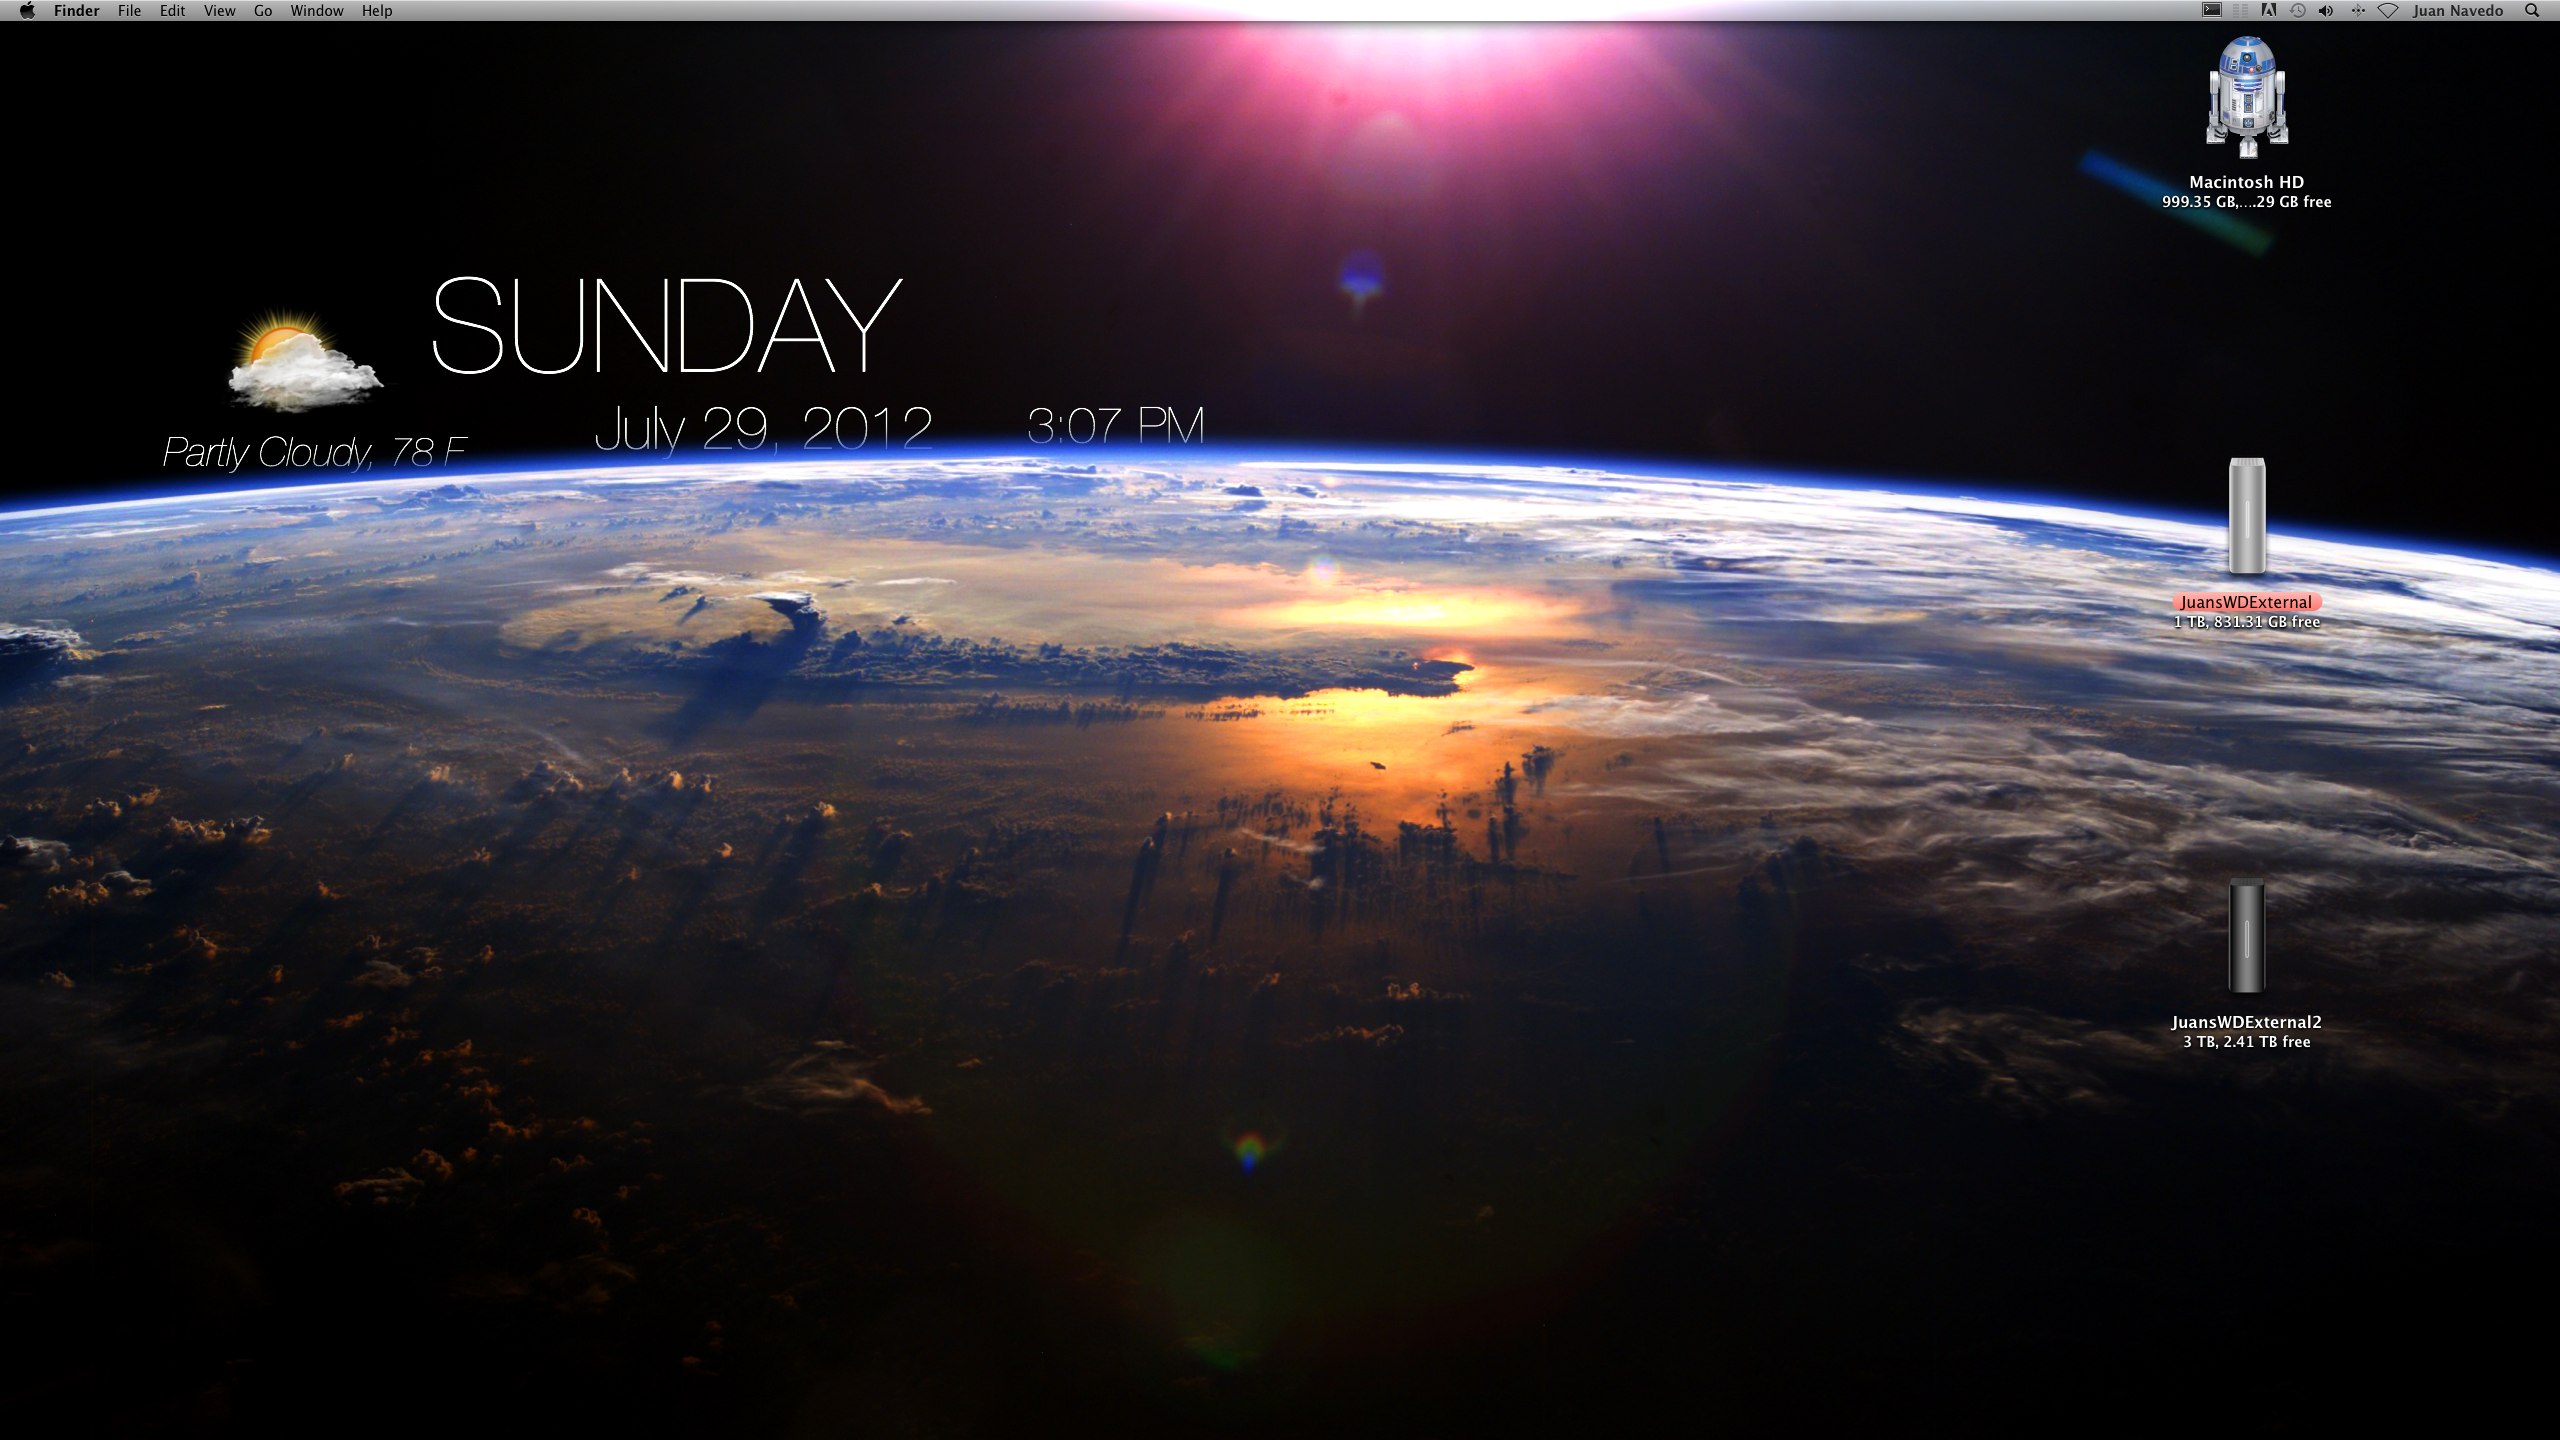 49+] Live Weather Wallpaper for PC on